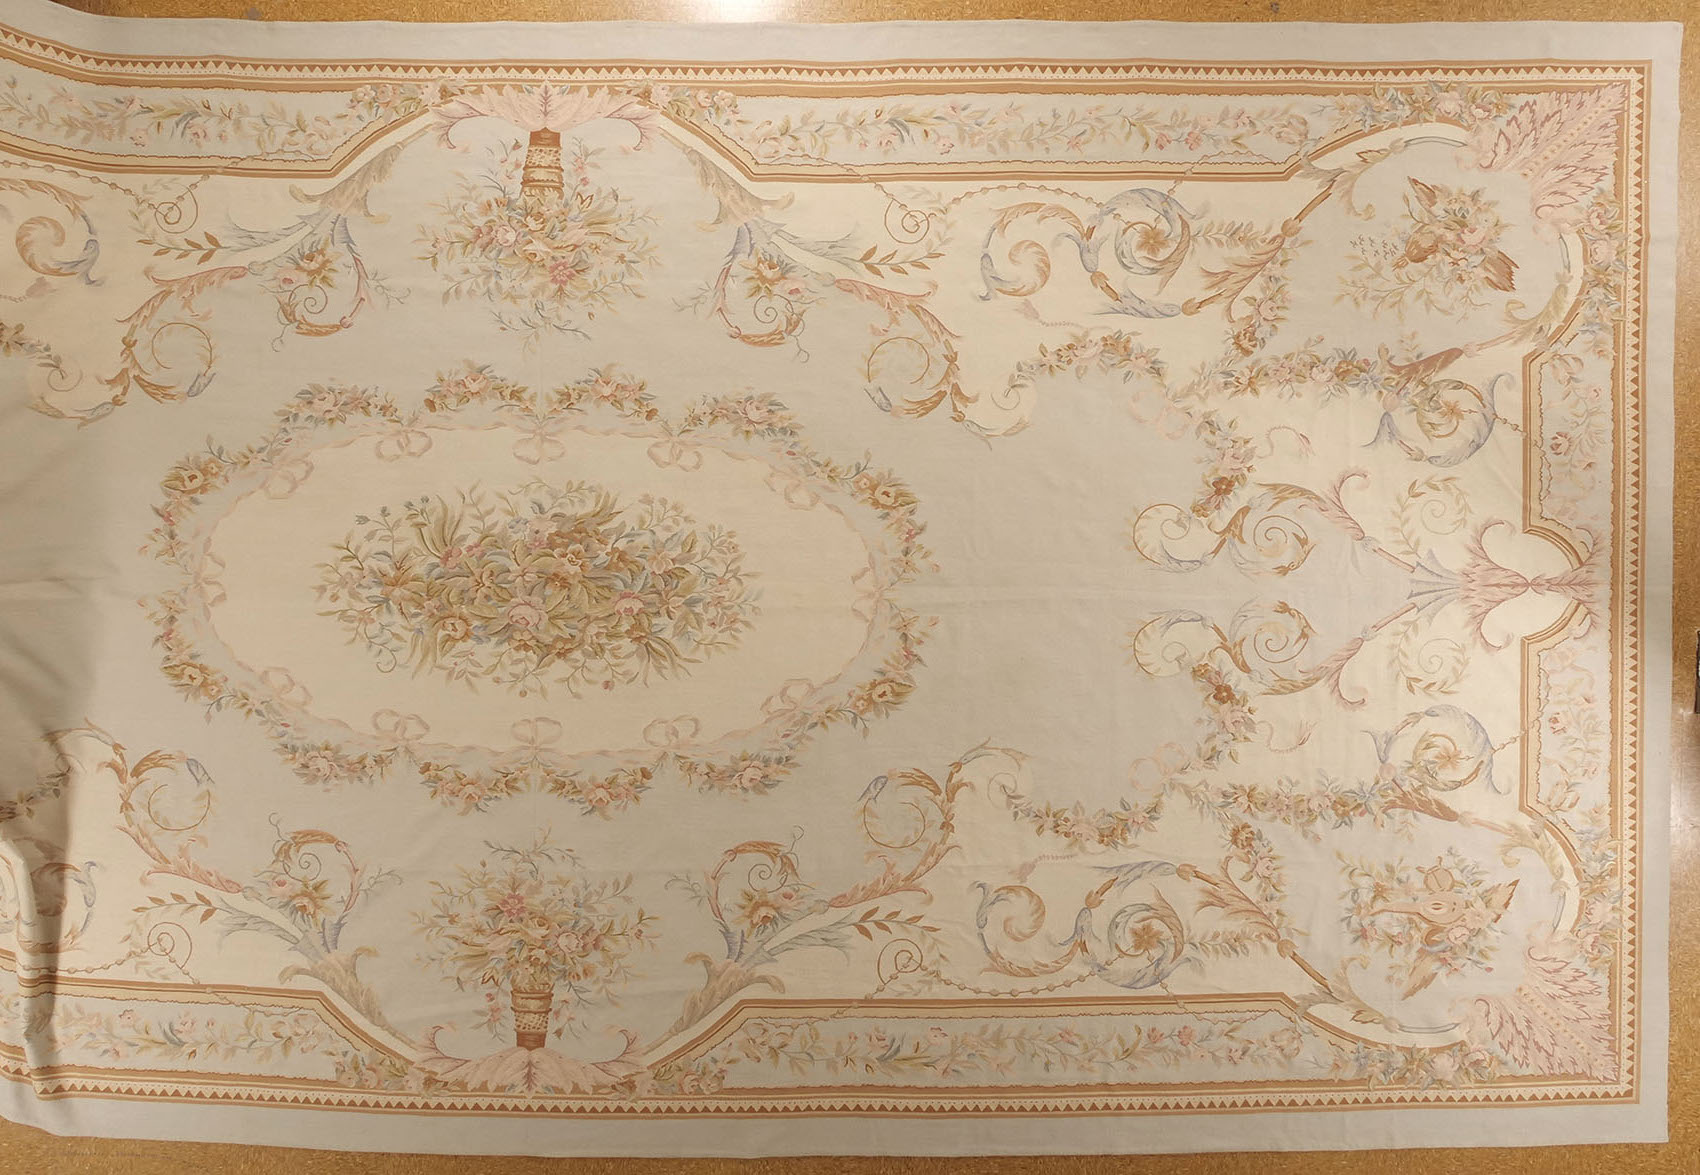 ModRen Rugs Inc Aubusson Savonnerie Tapestry | Photo 10 of 10 | Address: 3901 Liberty Ave Suite 10, North Bergen, NJ 07047, United States | Phone: (201) 866-0909